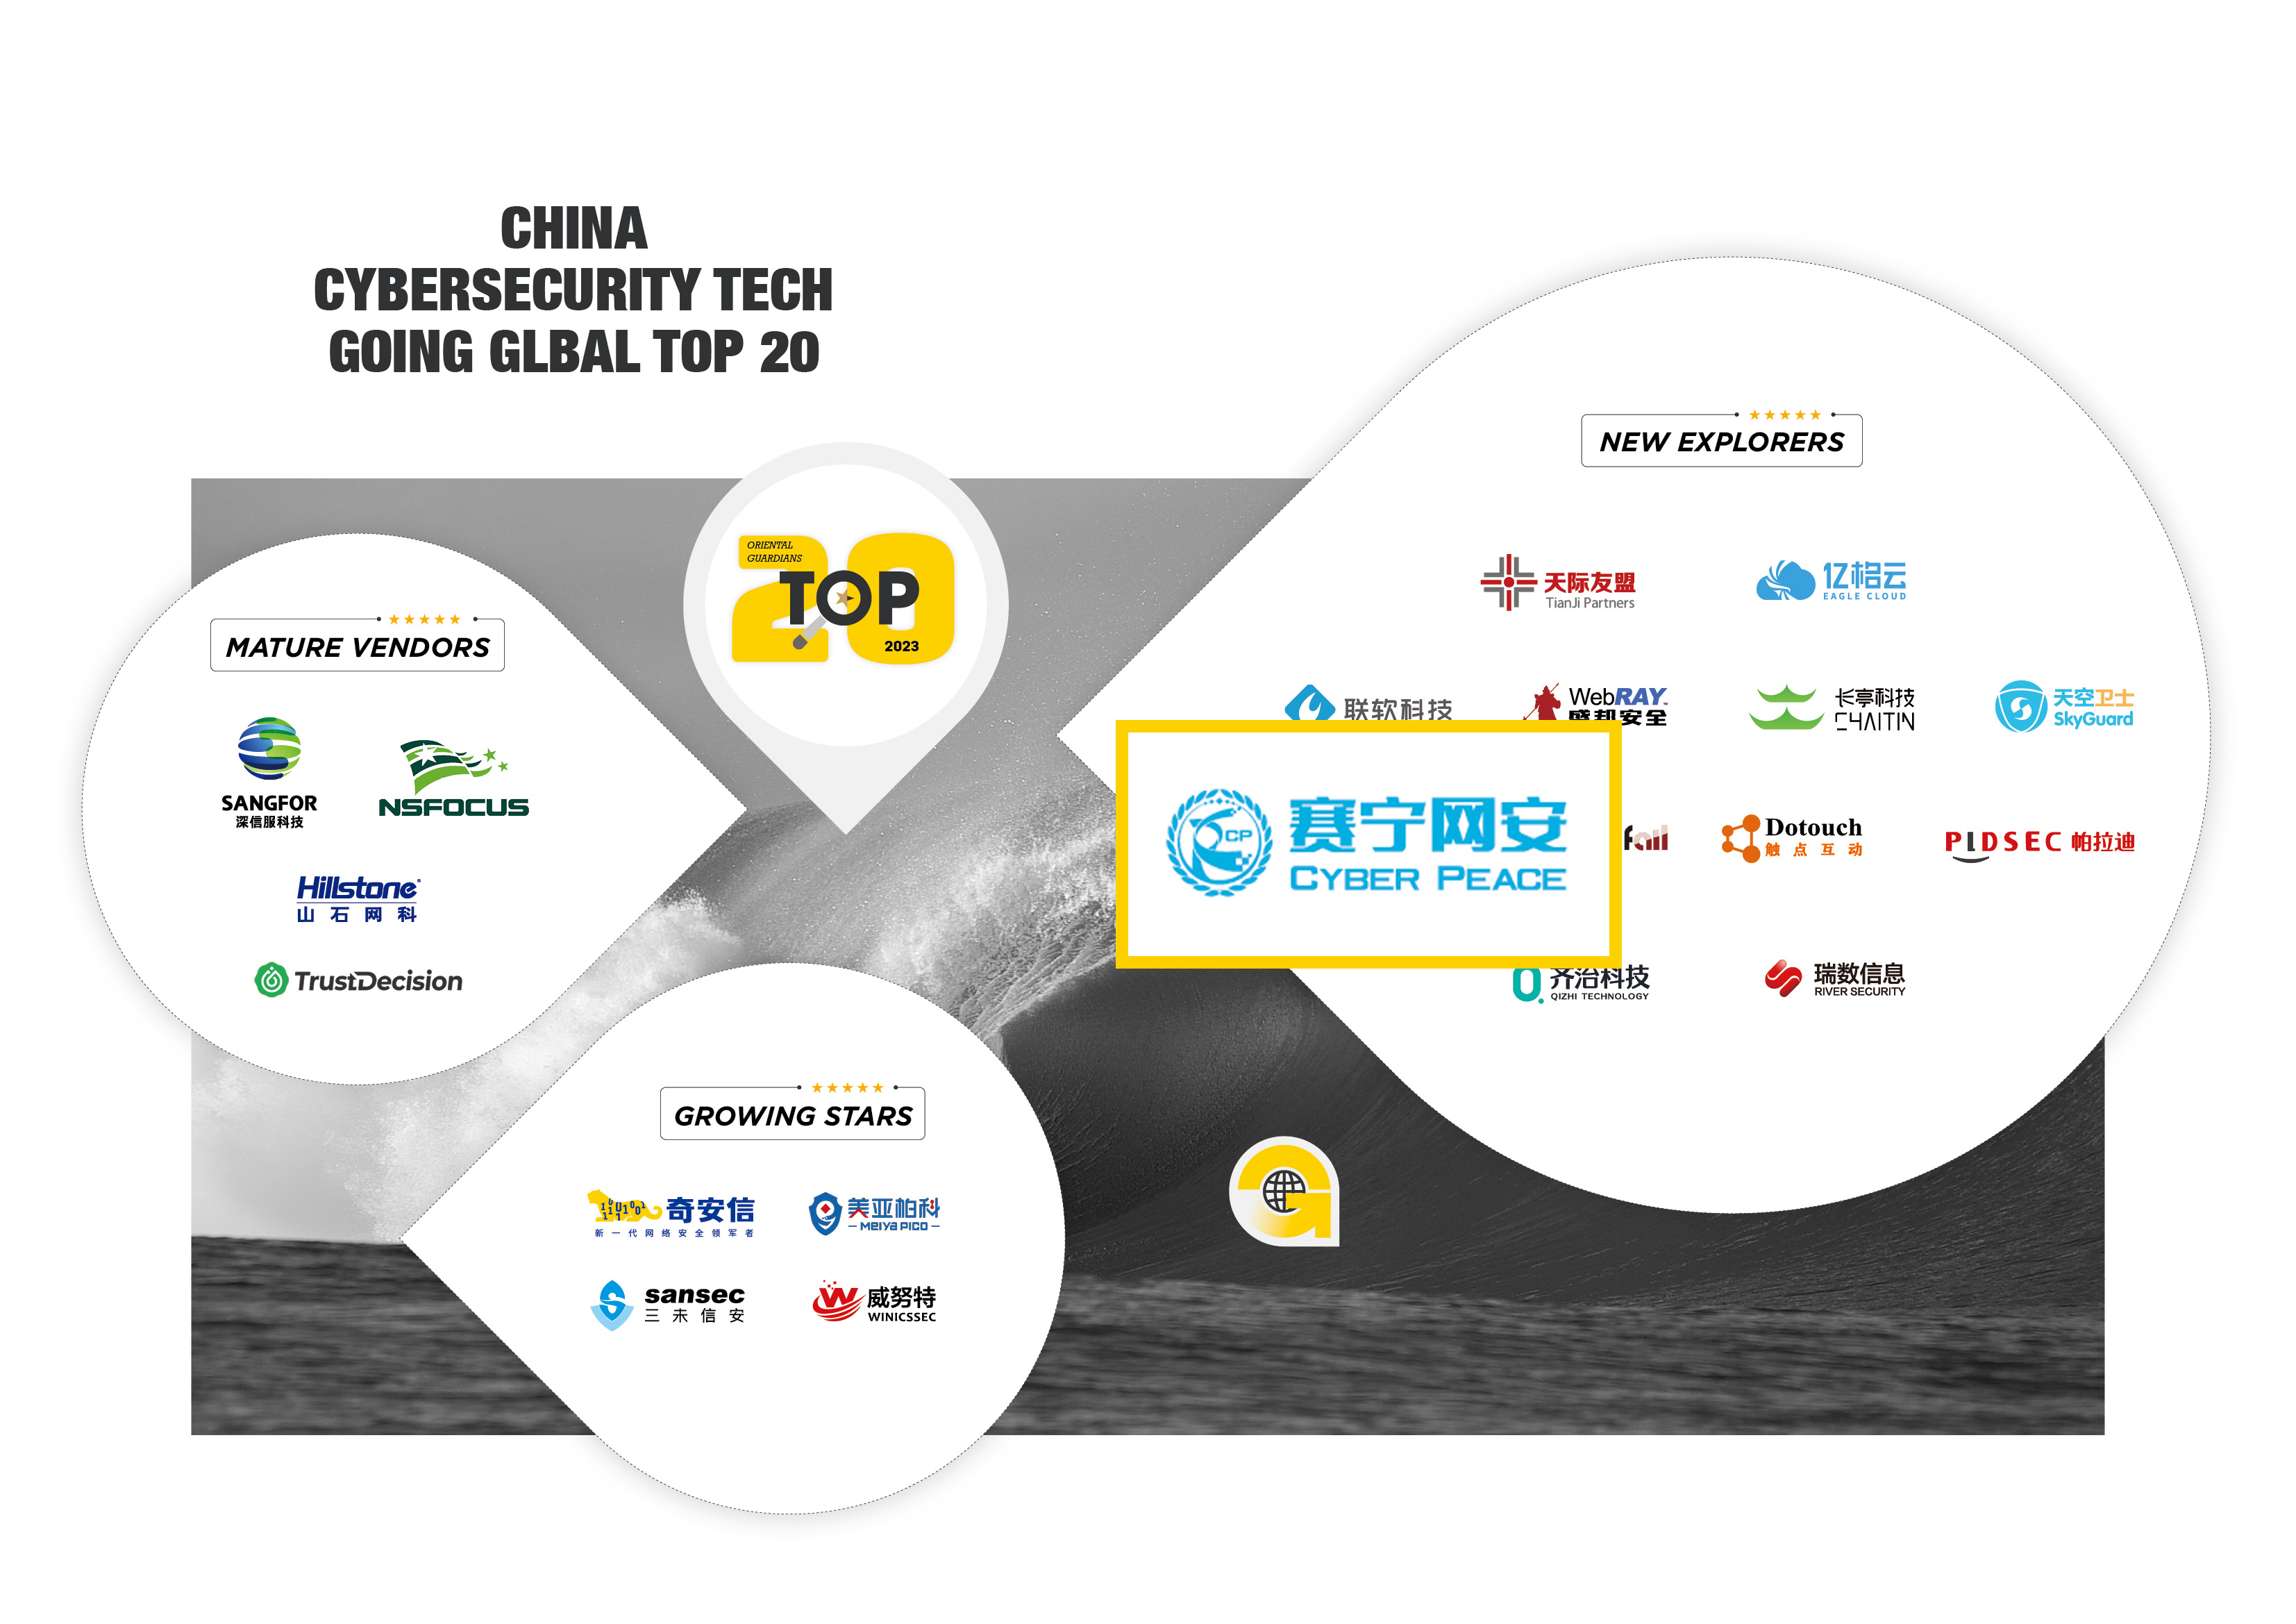 "Top 20 Chinese Network Security Enterprises Going Overseas"